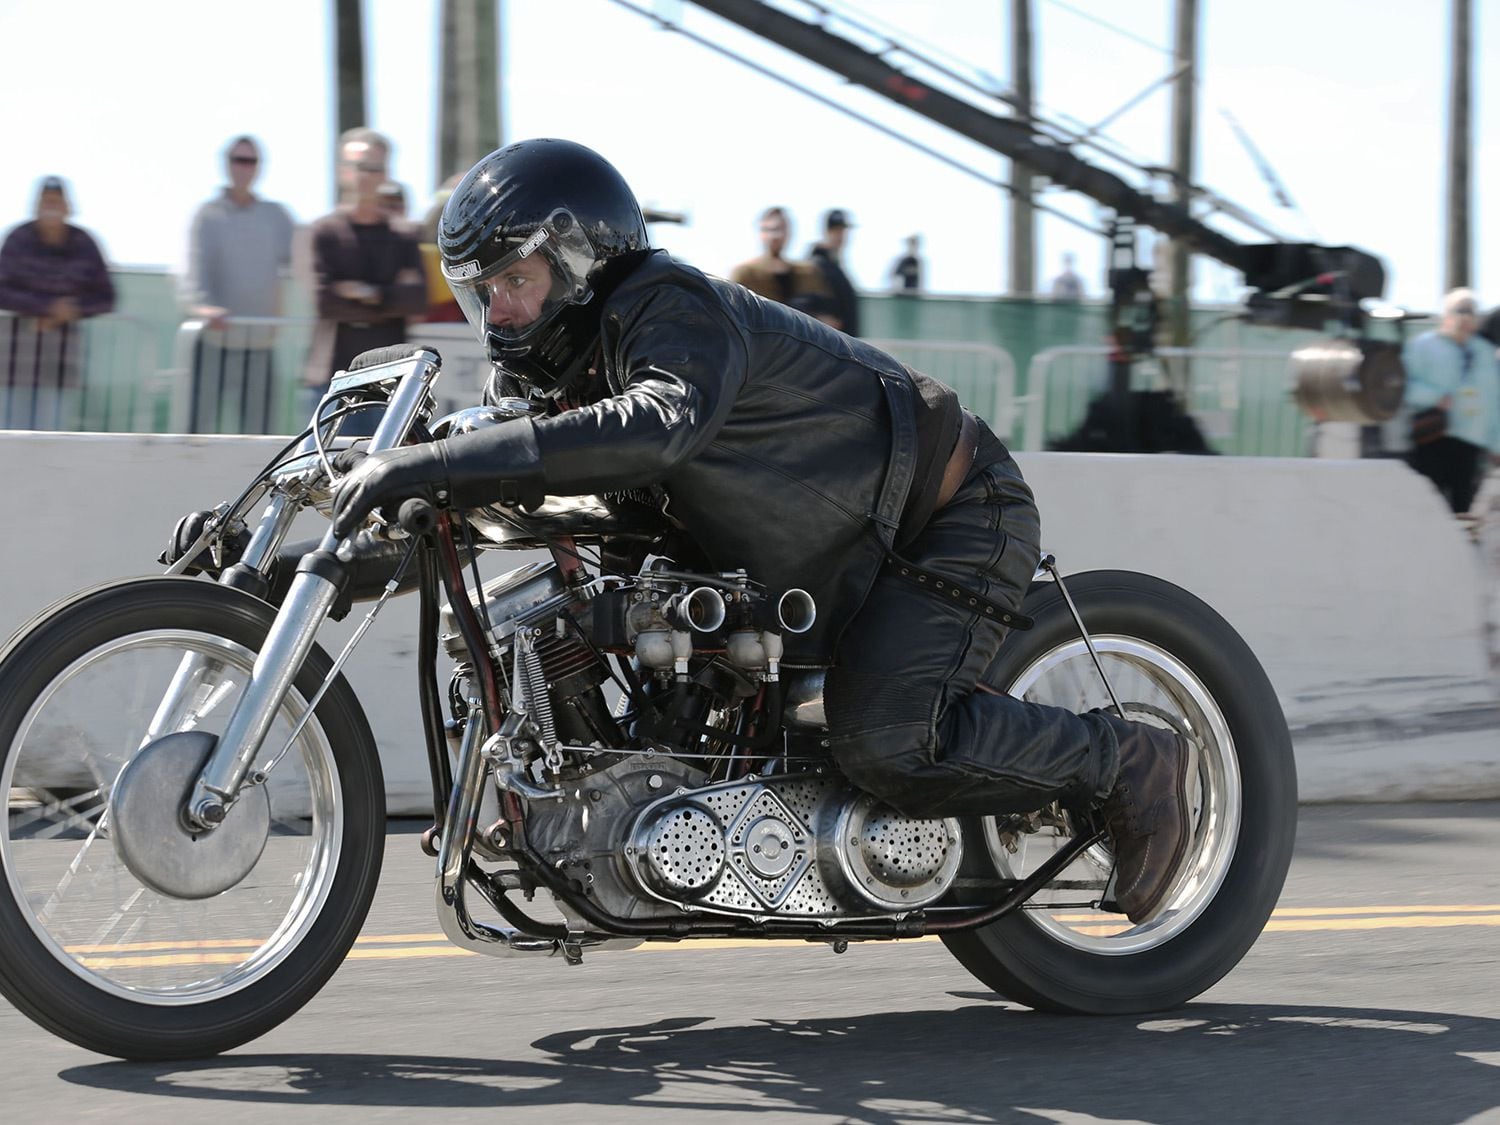 Nick Toscano on his dual-carbed 1950 EL Panhead was one of the fastest riders of the day.